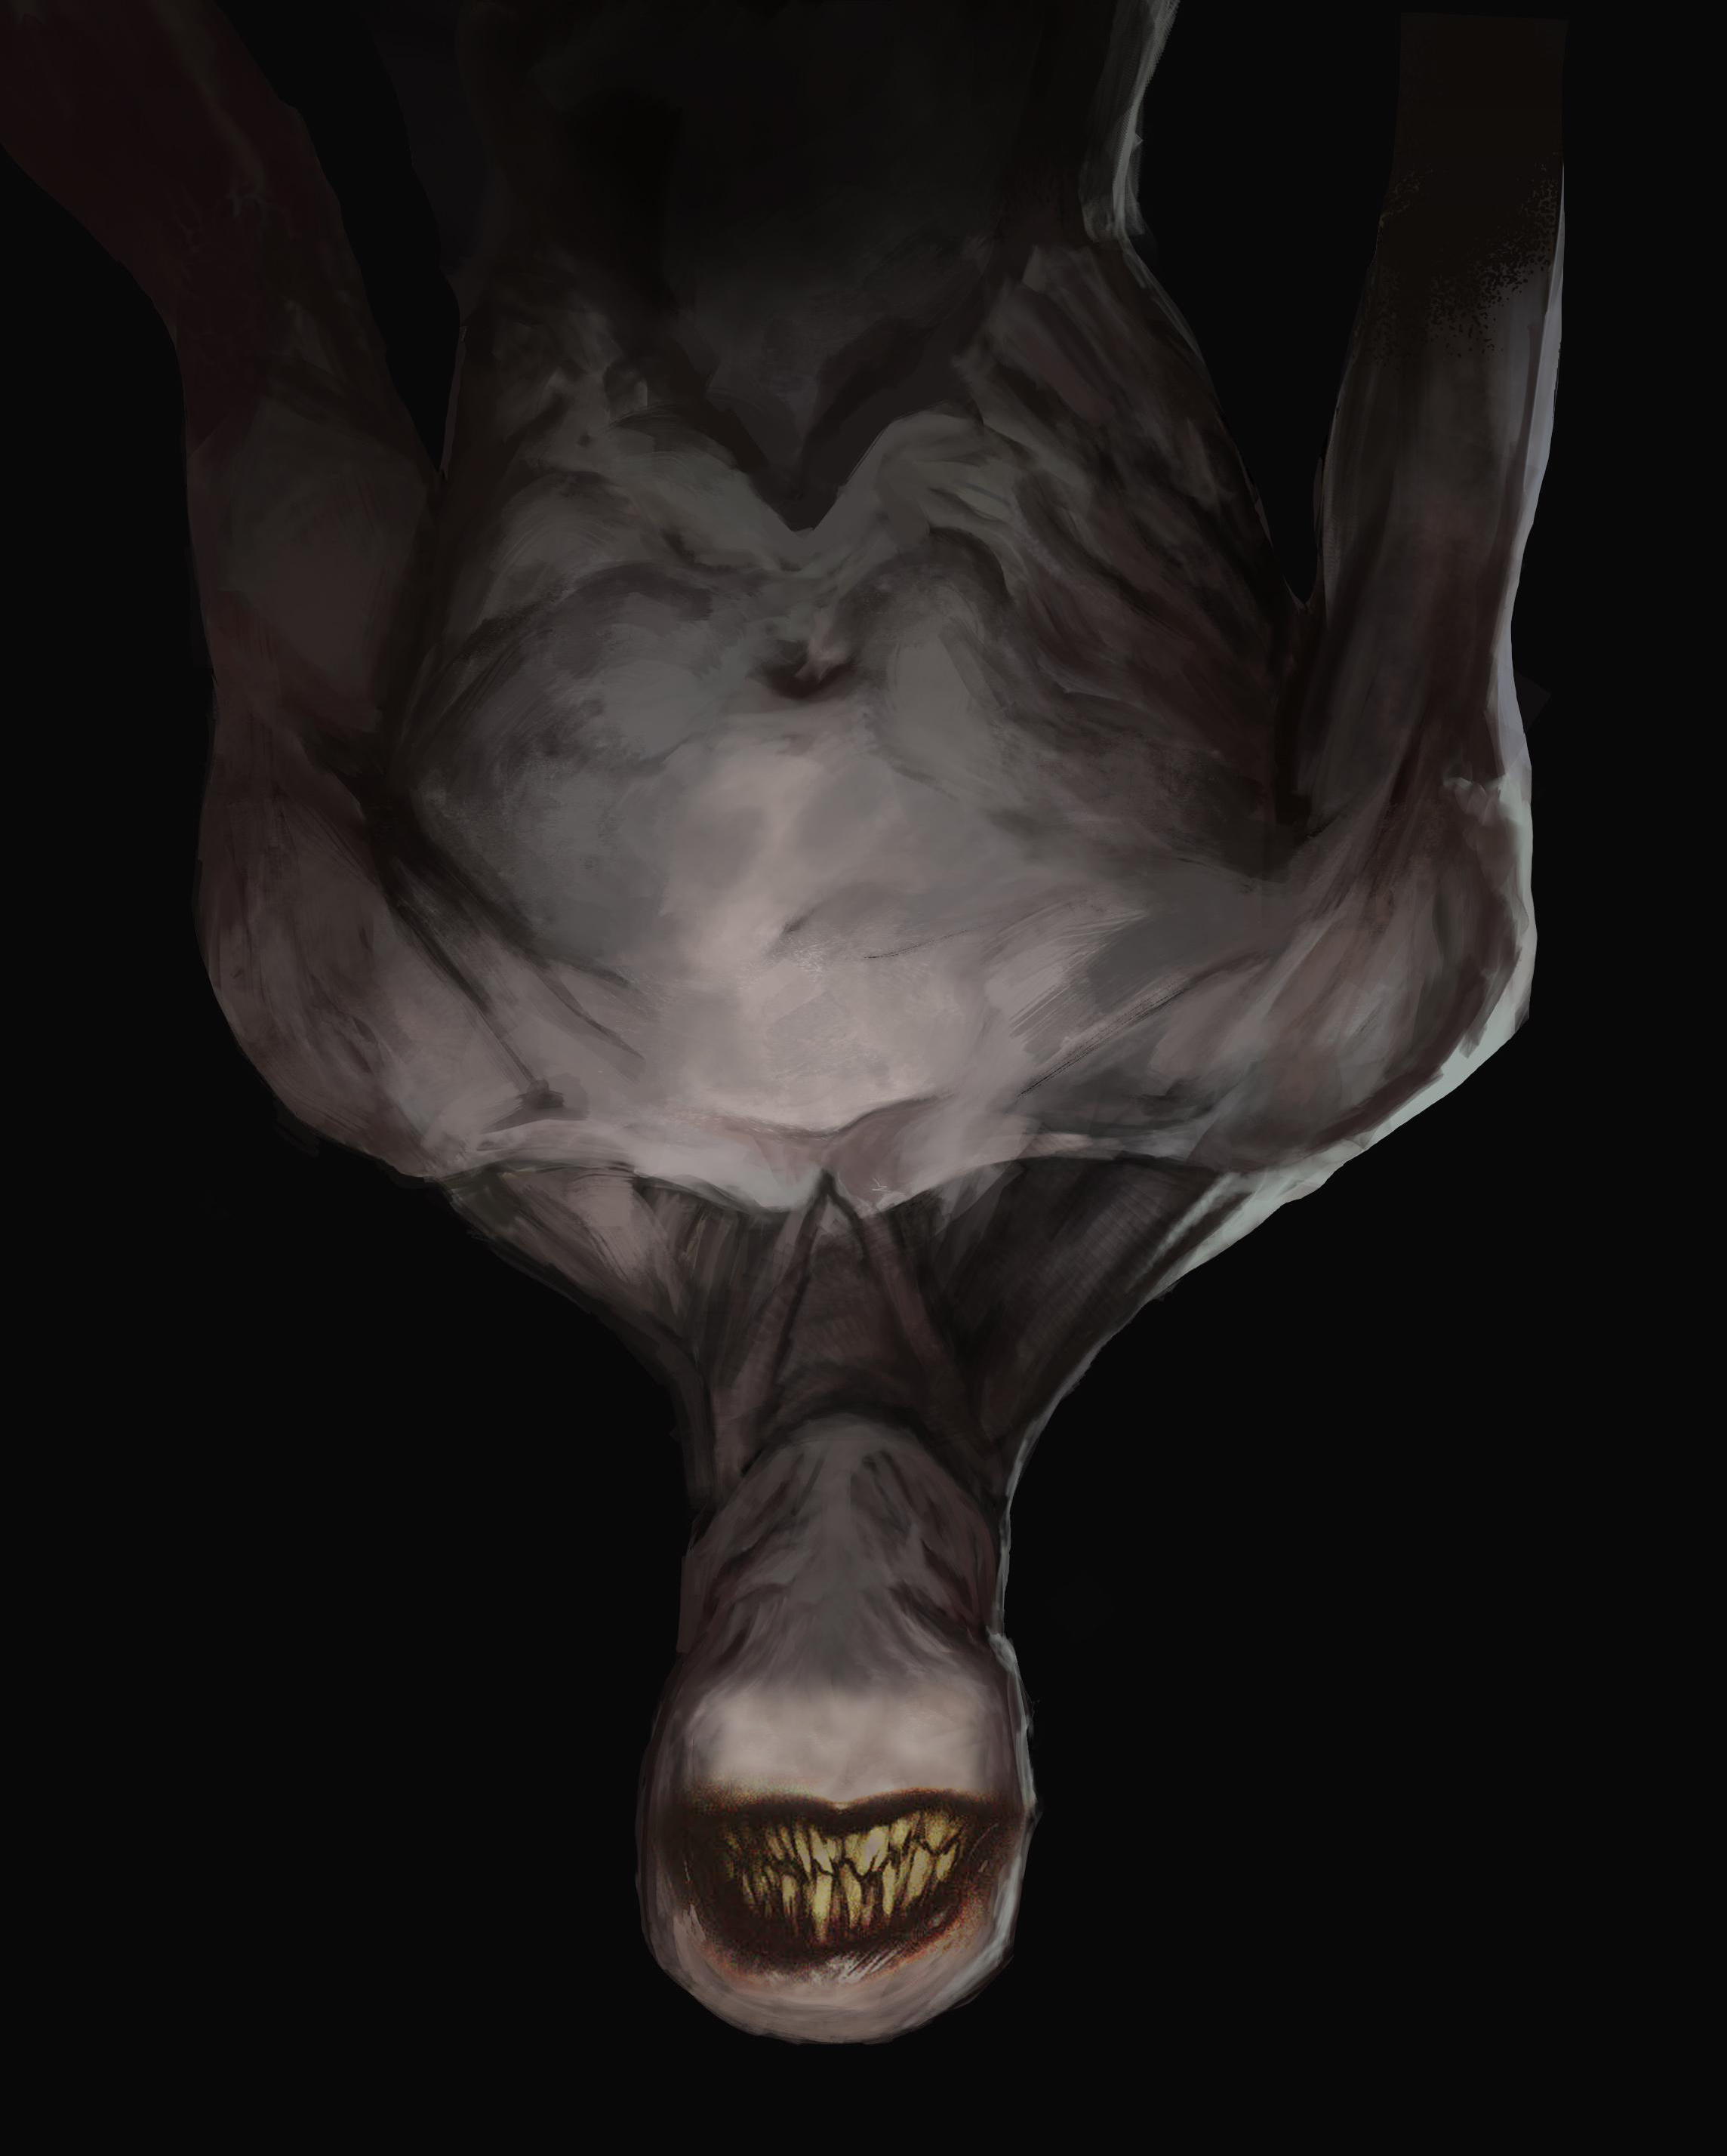 The Man with the Upside-Down Face, Villains Wiki